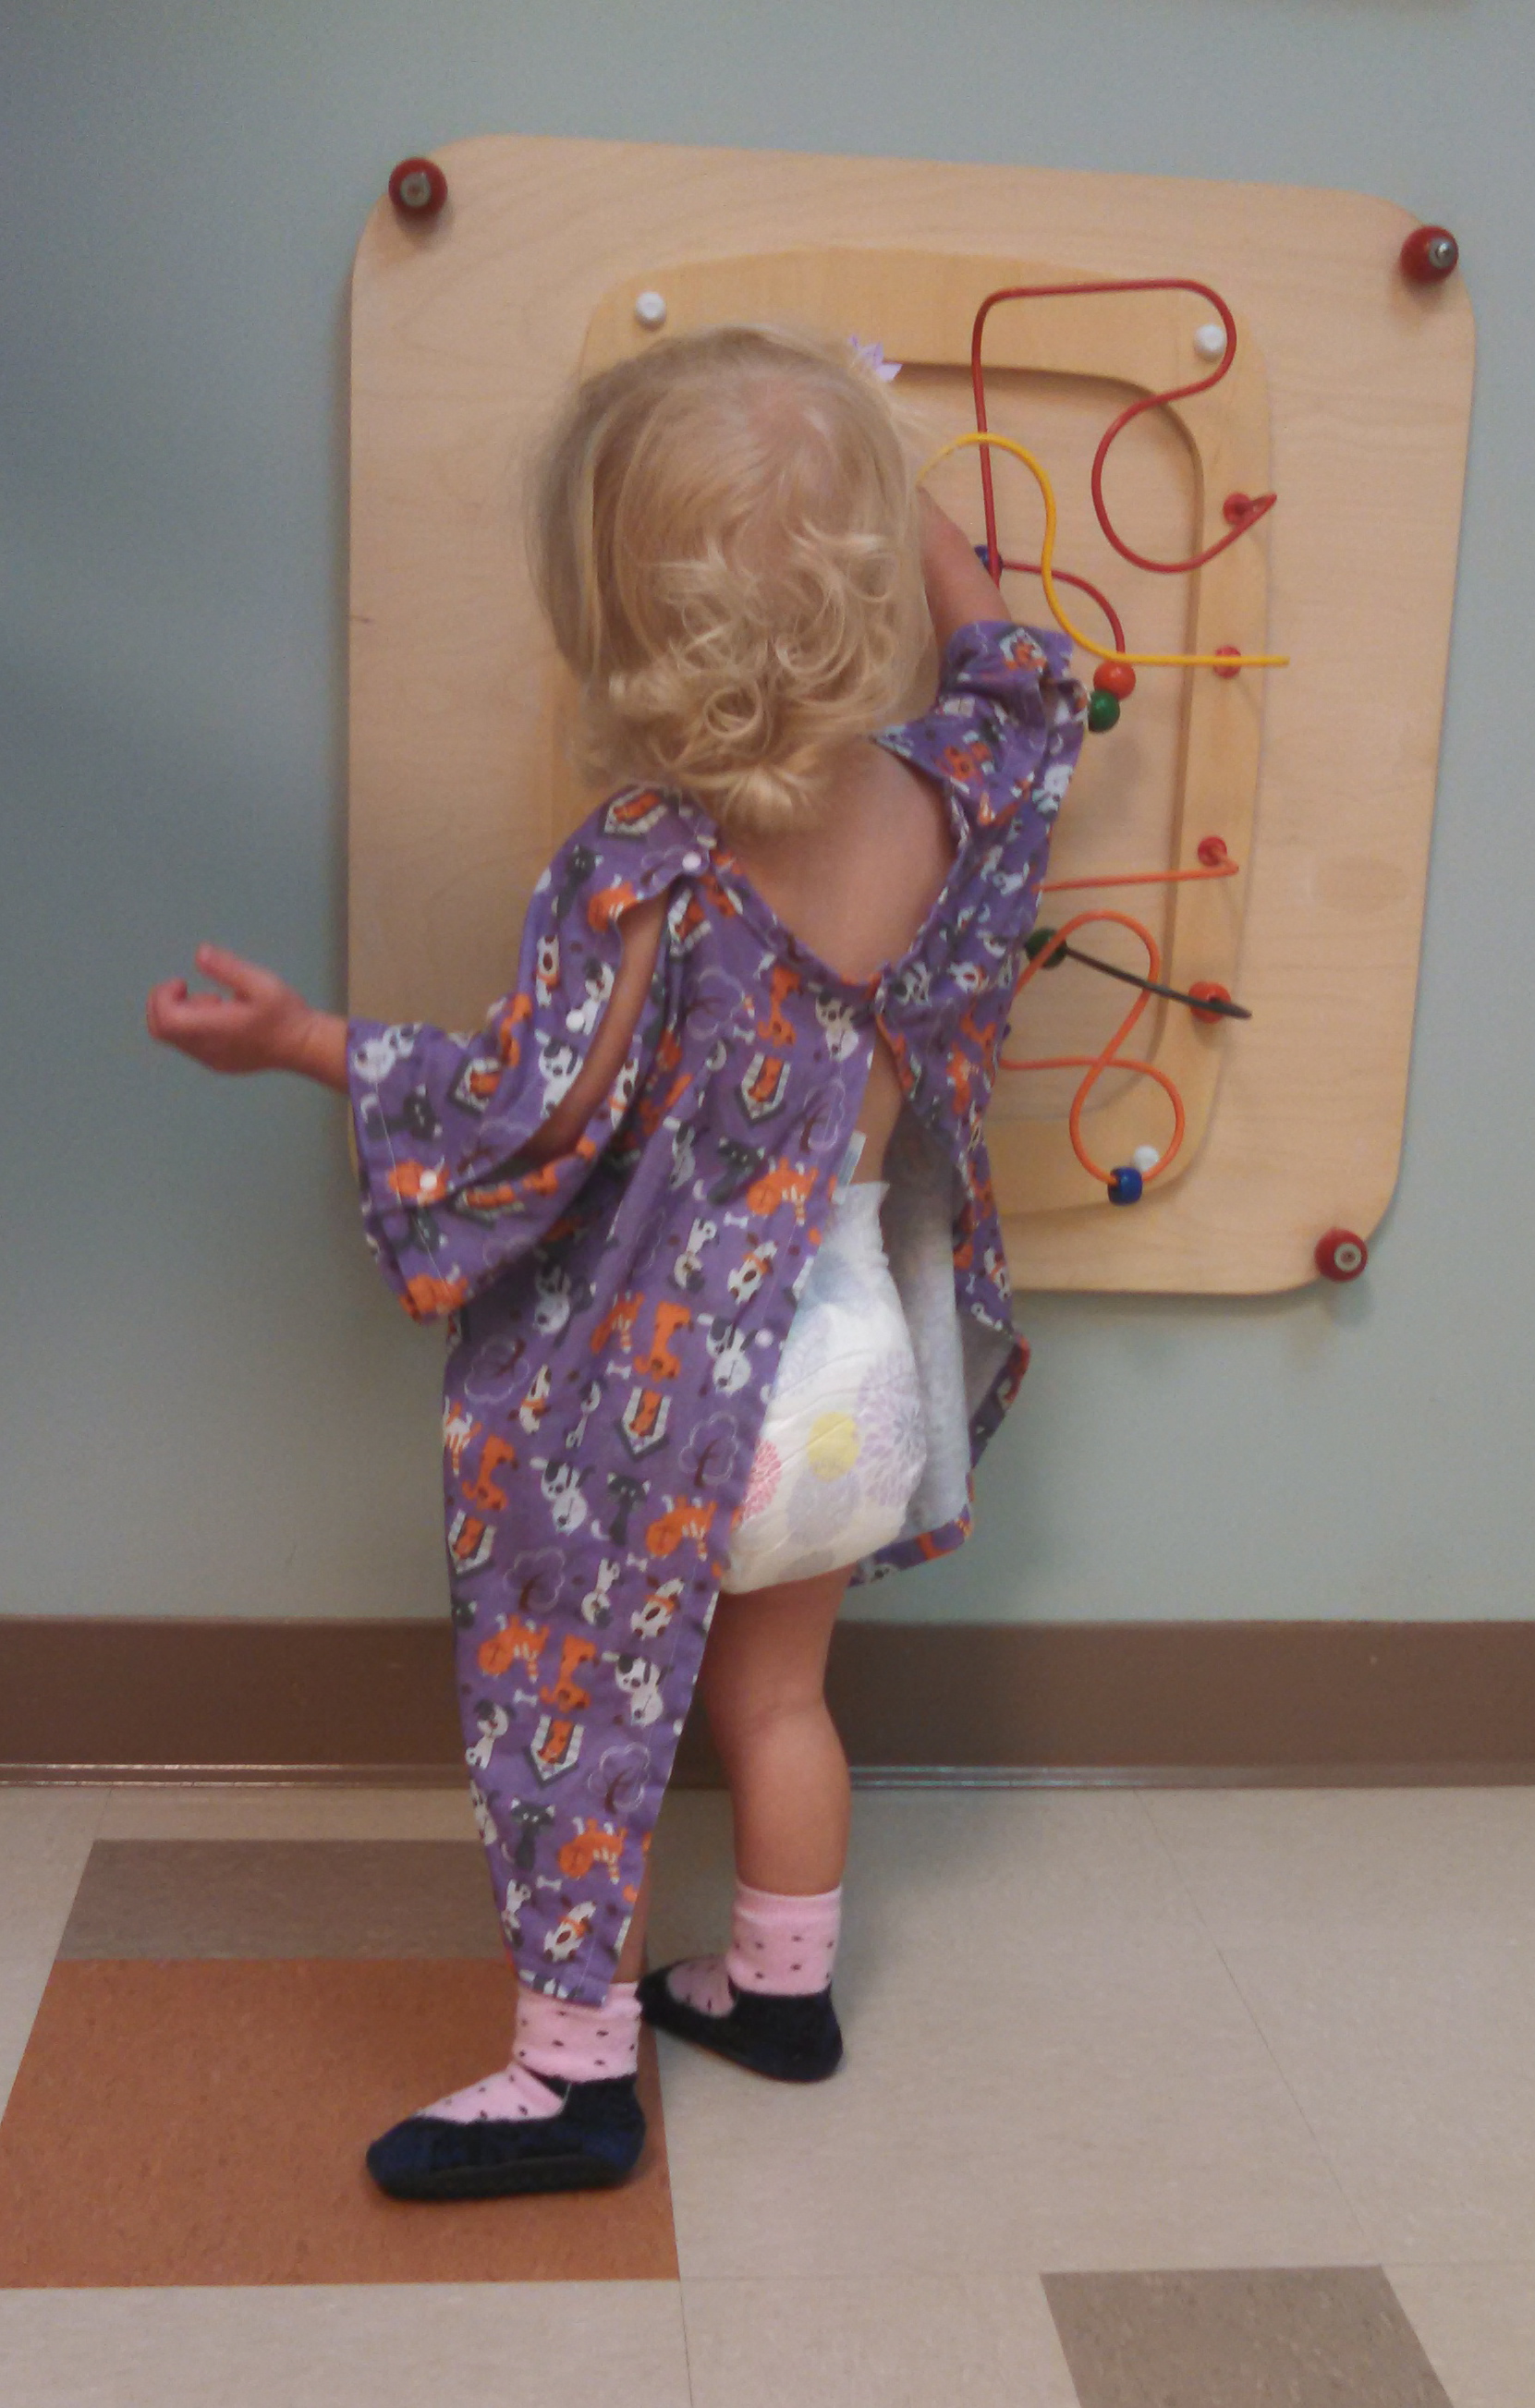 Why aren't adult hospital gowns this cute?